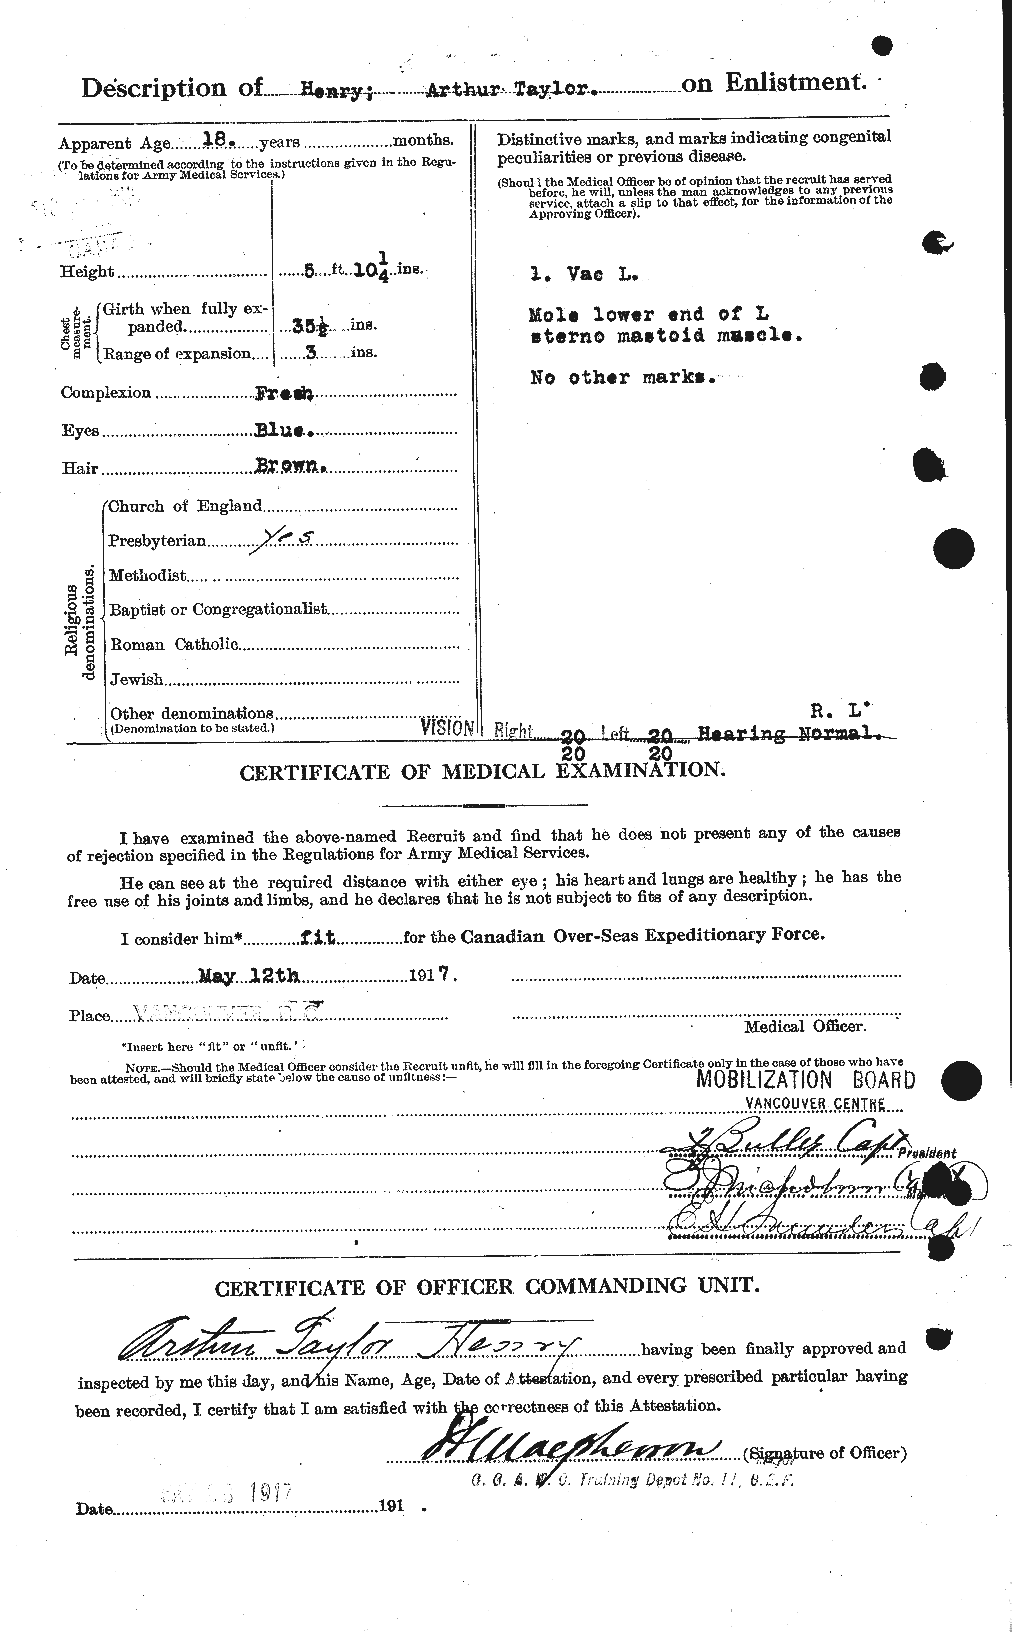 Personnel Records of the First World War - CEF 392786b